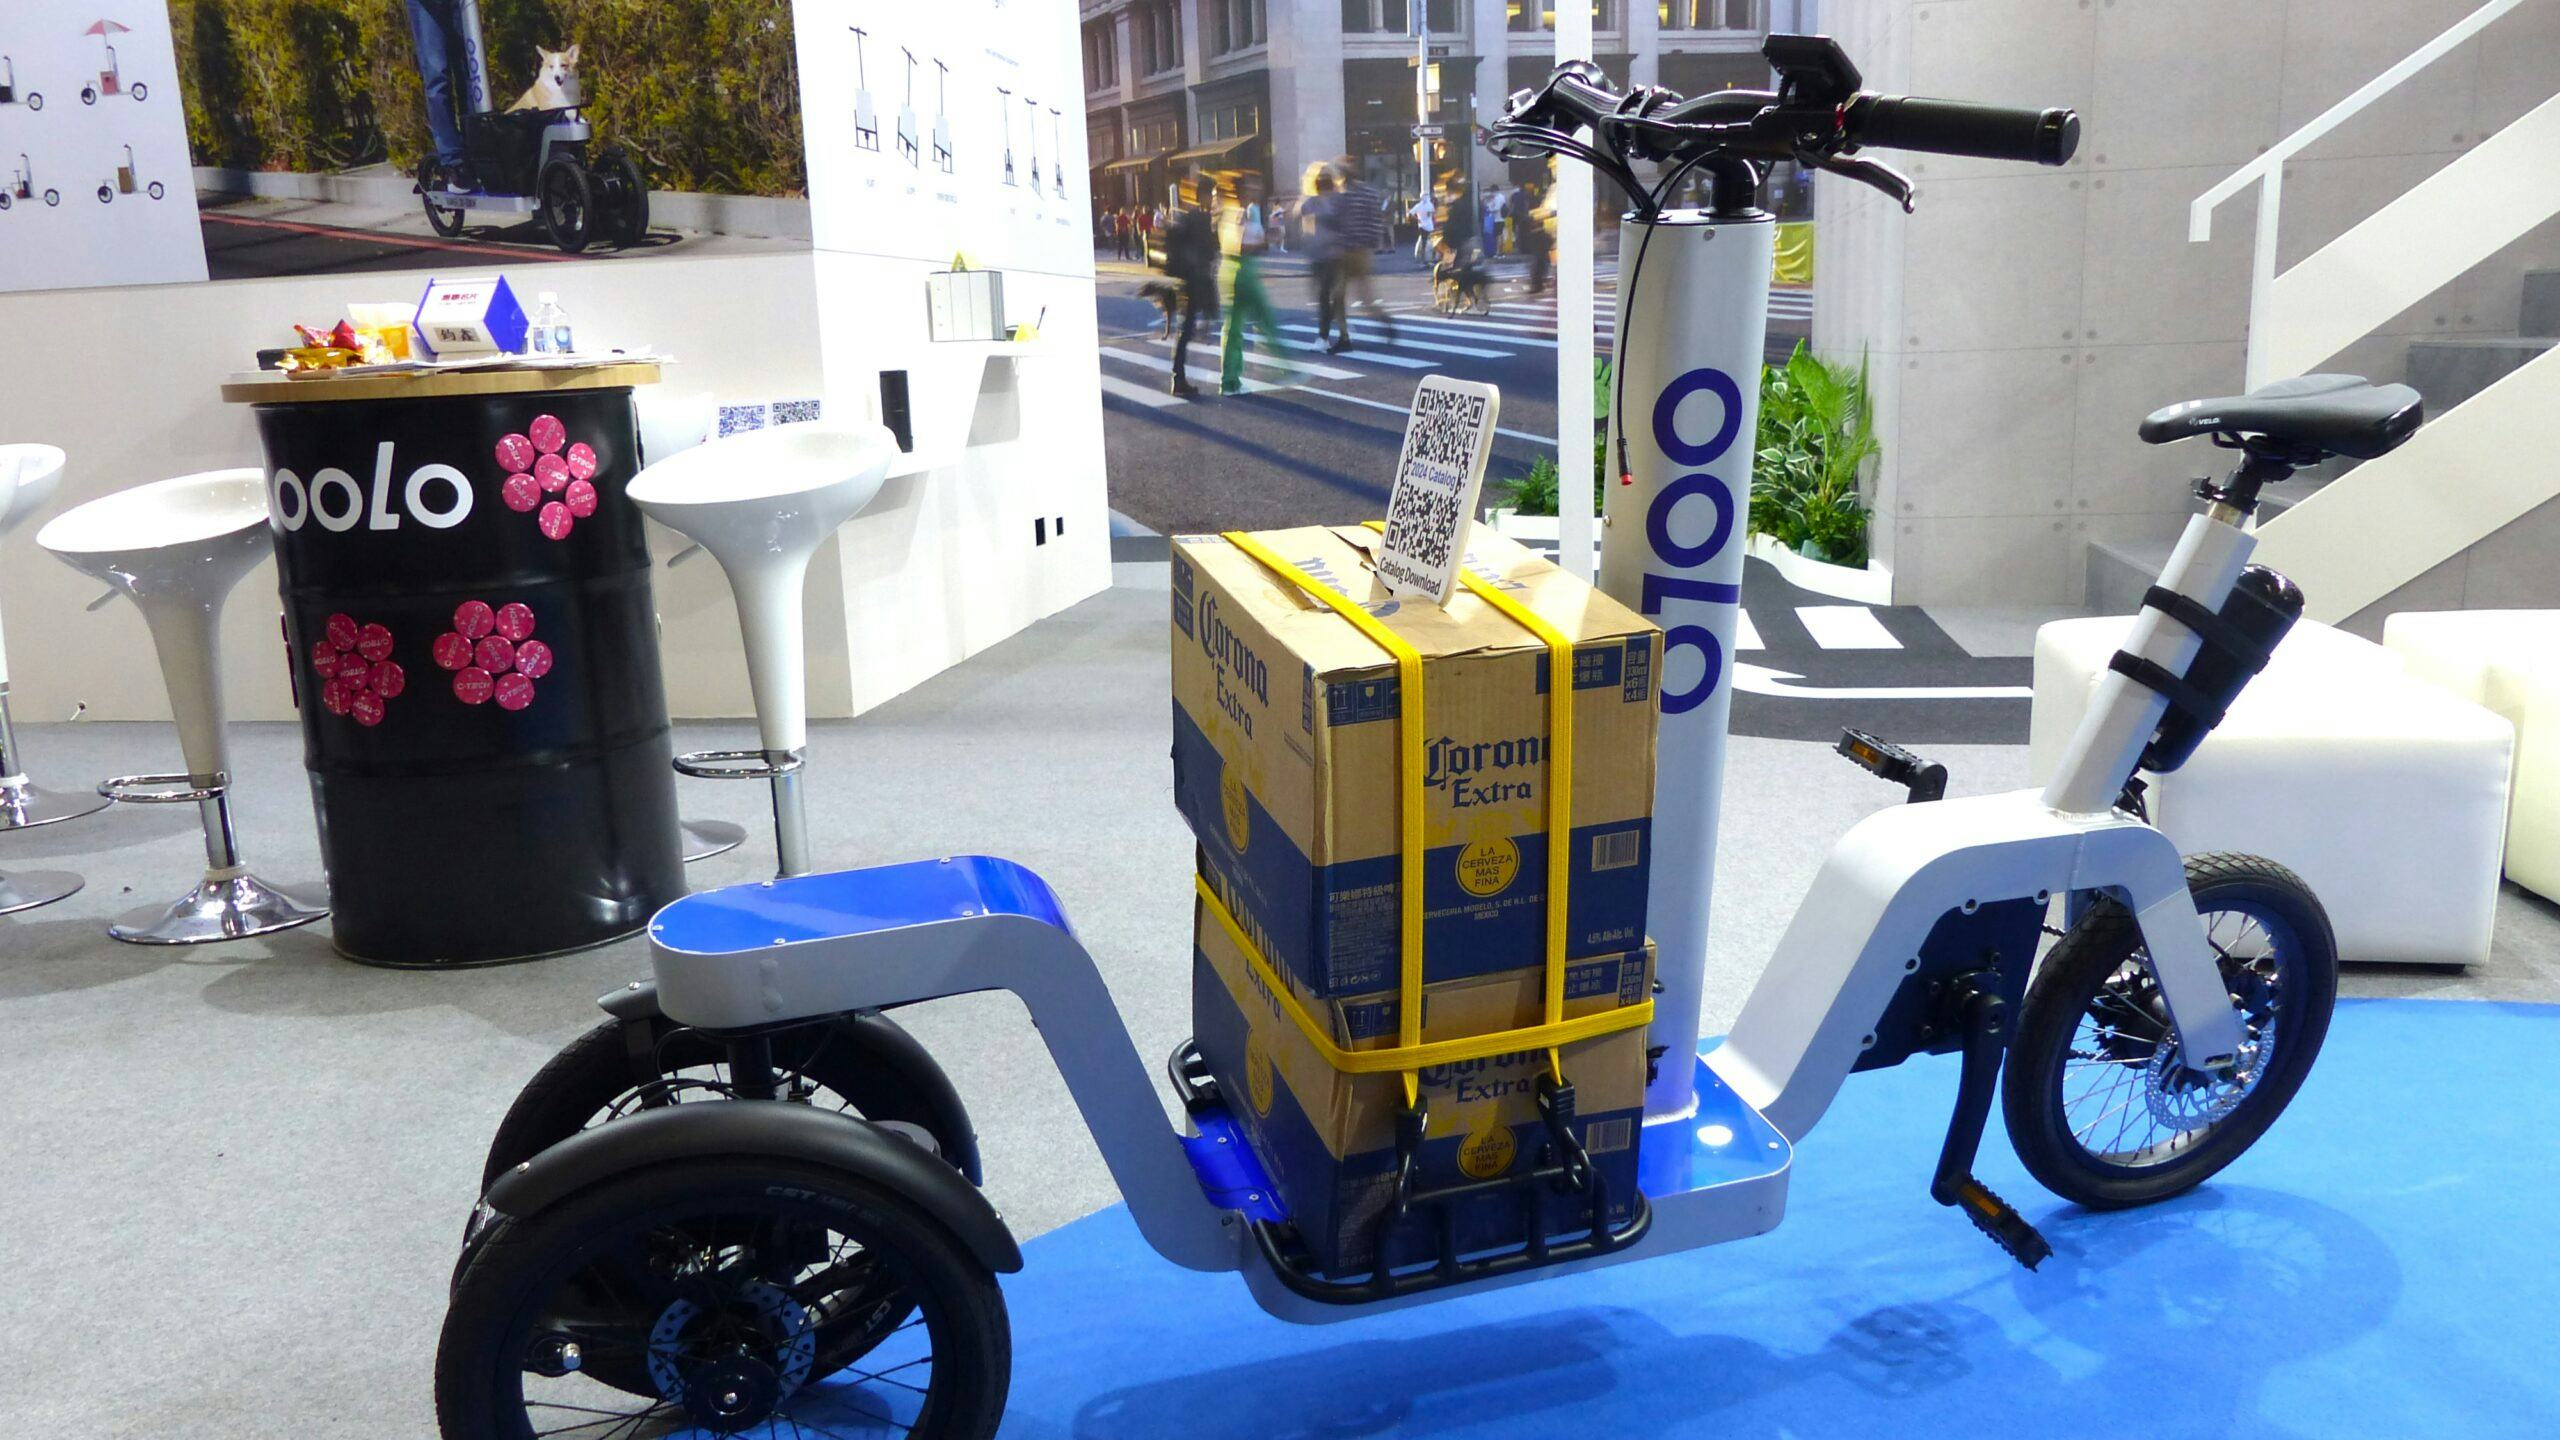 The Oloo CycleBoard comes in an e-scooter and e-bike version, both with a front and rear drive. – Photo Bike Europe